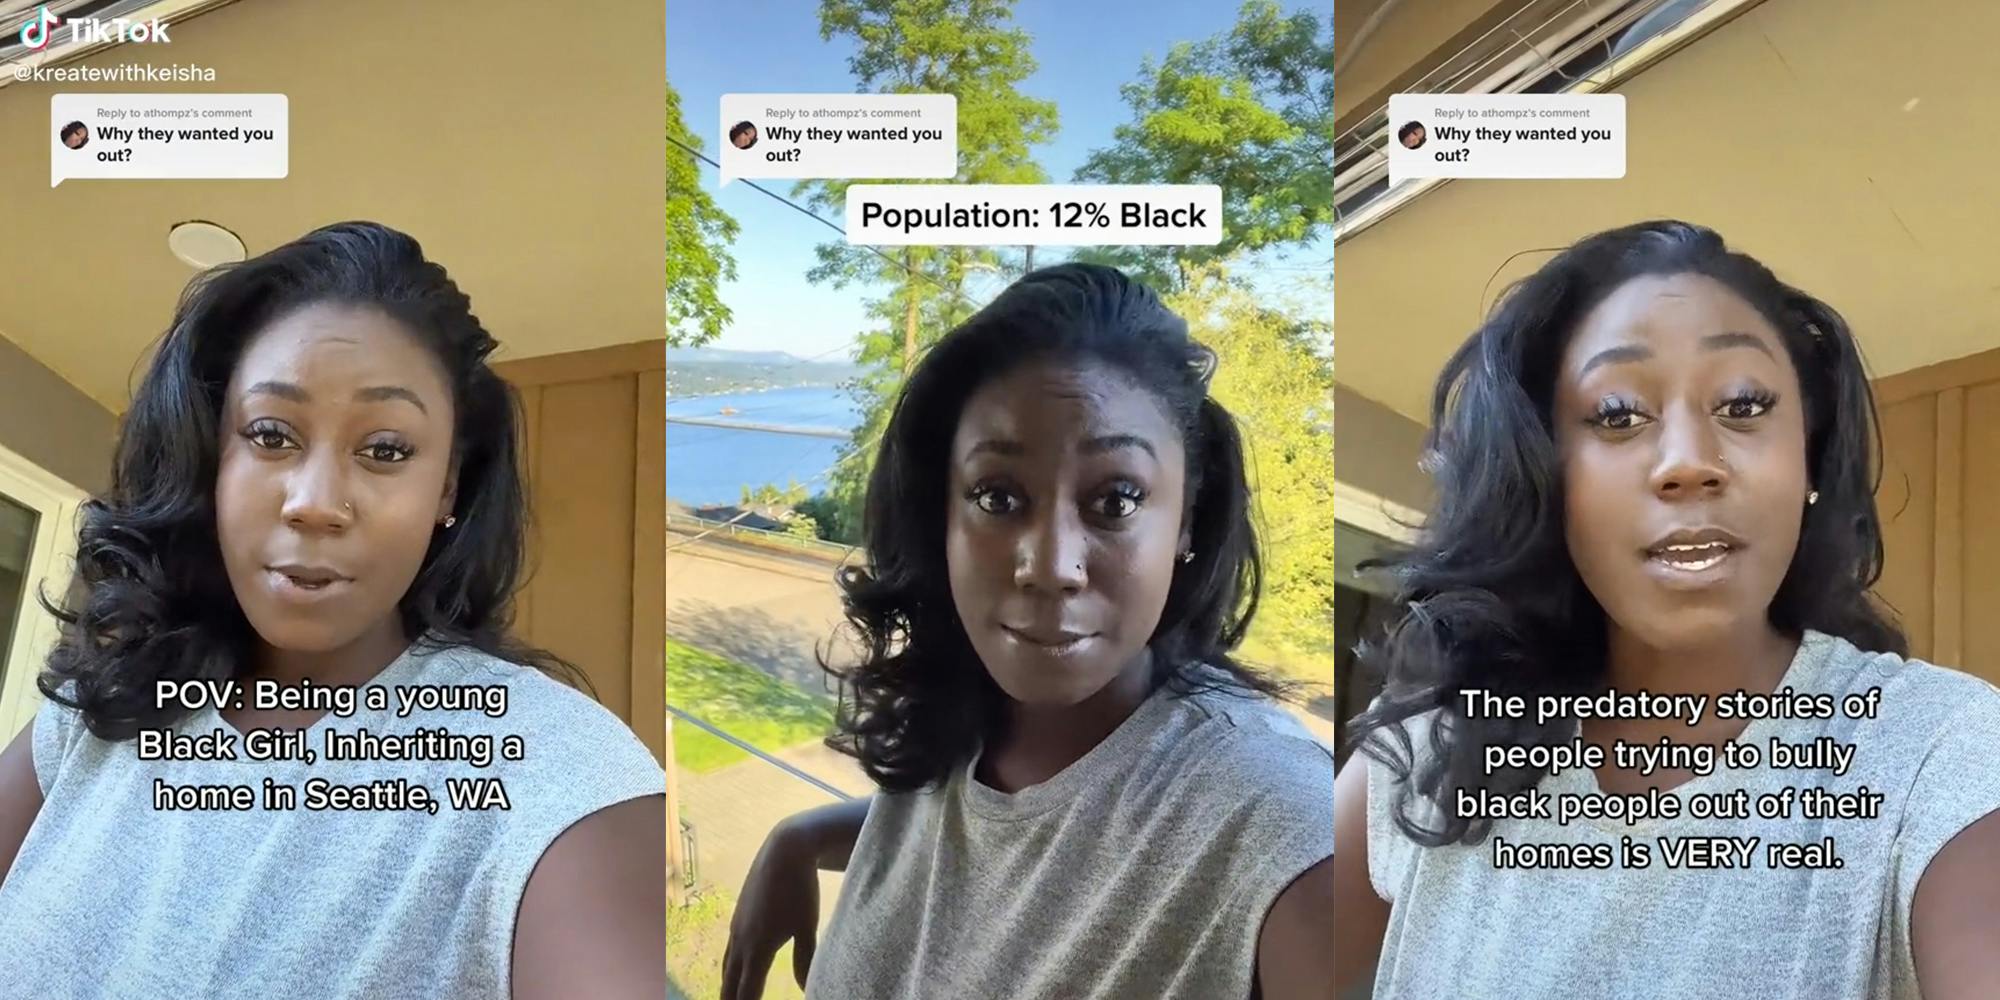 young woman with captions "POV: being a young Black Girl, inheriting a home in Seattle, WA" (l) "Population: 12% Black" (c) "The predatory stories of people trying to bully black people out of their homes is VERY real." (r)